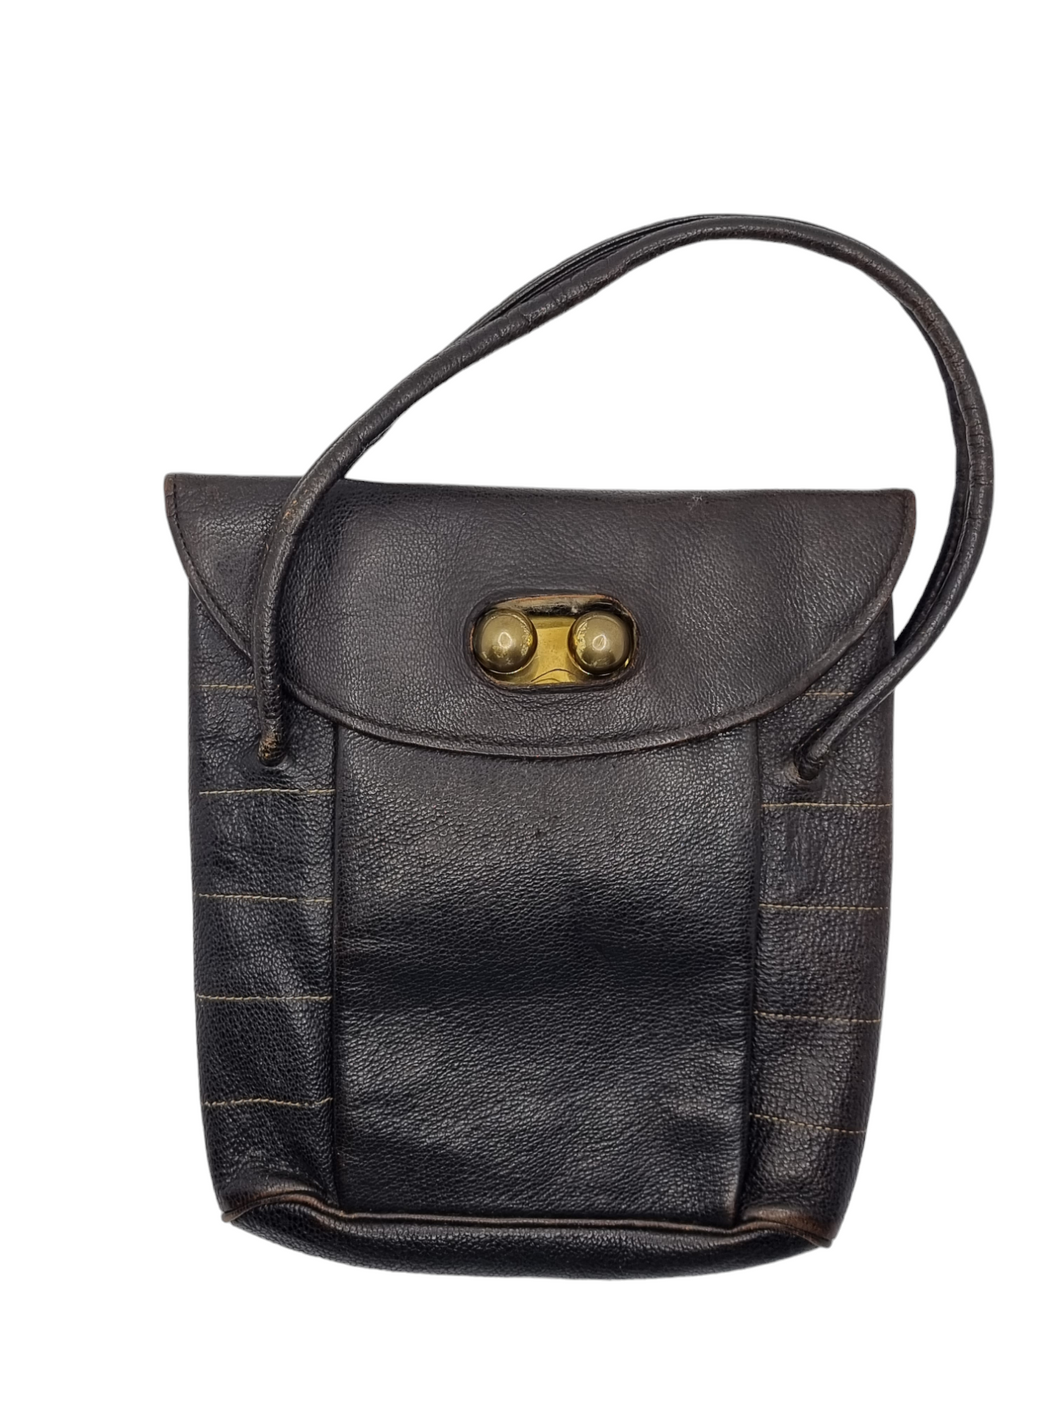 1930s/1940s Black Stitched Edge Leather Bag